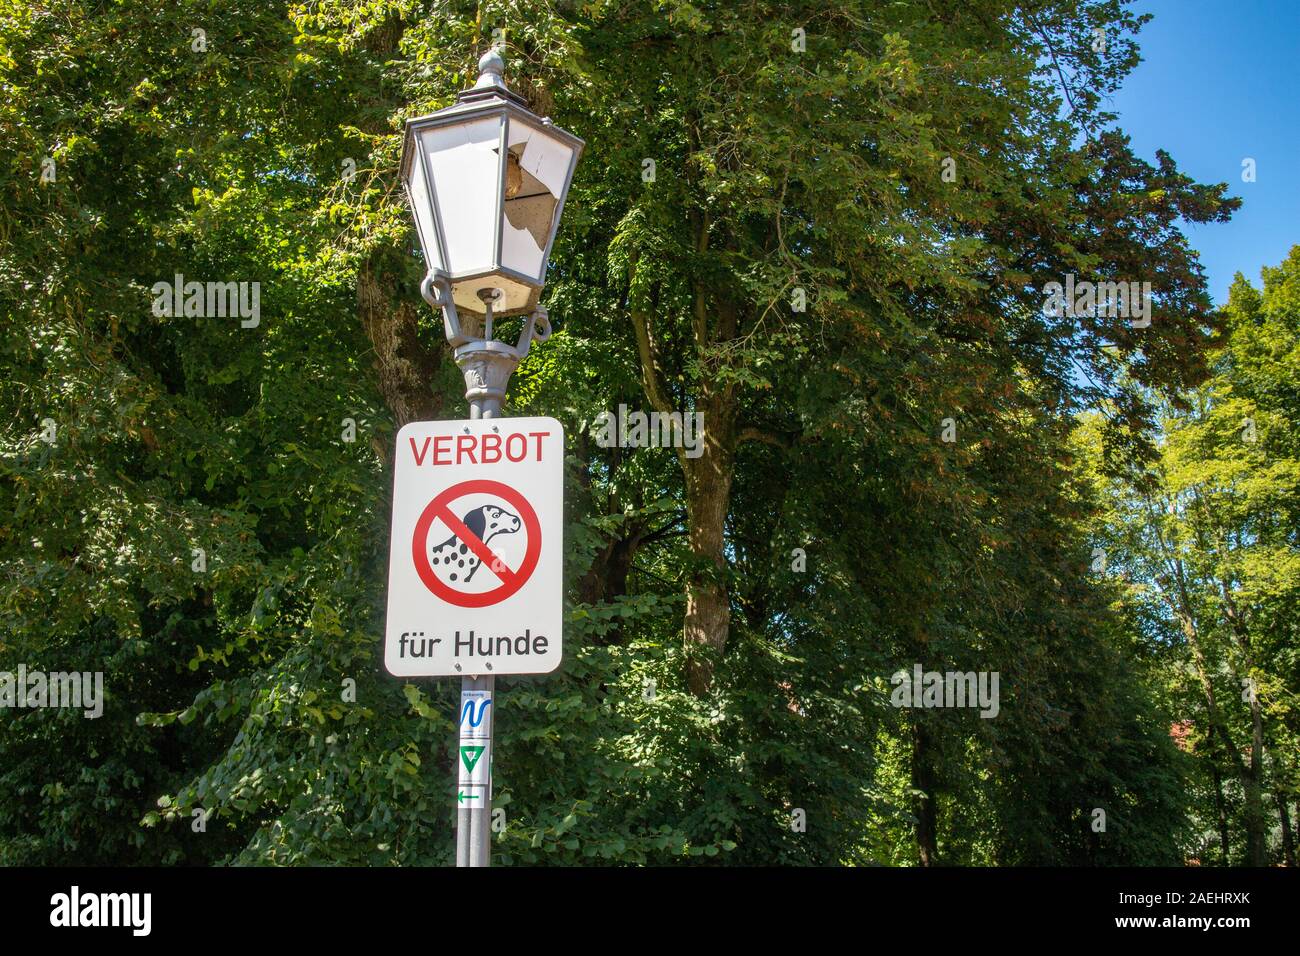 Neckargemünd, Germany - August 18, 2019: street lamp in a public park in Germany damaged by vandalism including a sign in German 'Verbot für Hunde' (p Stock Photo